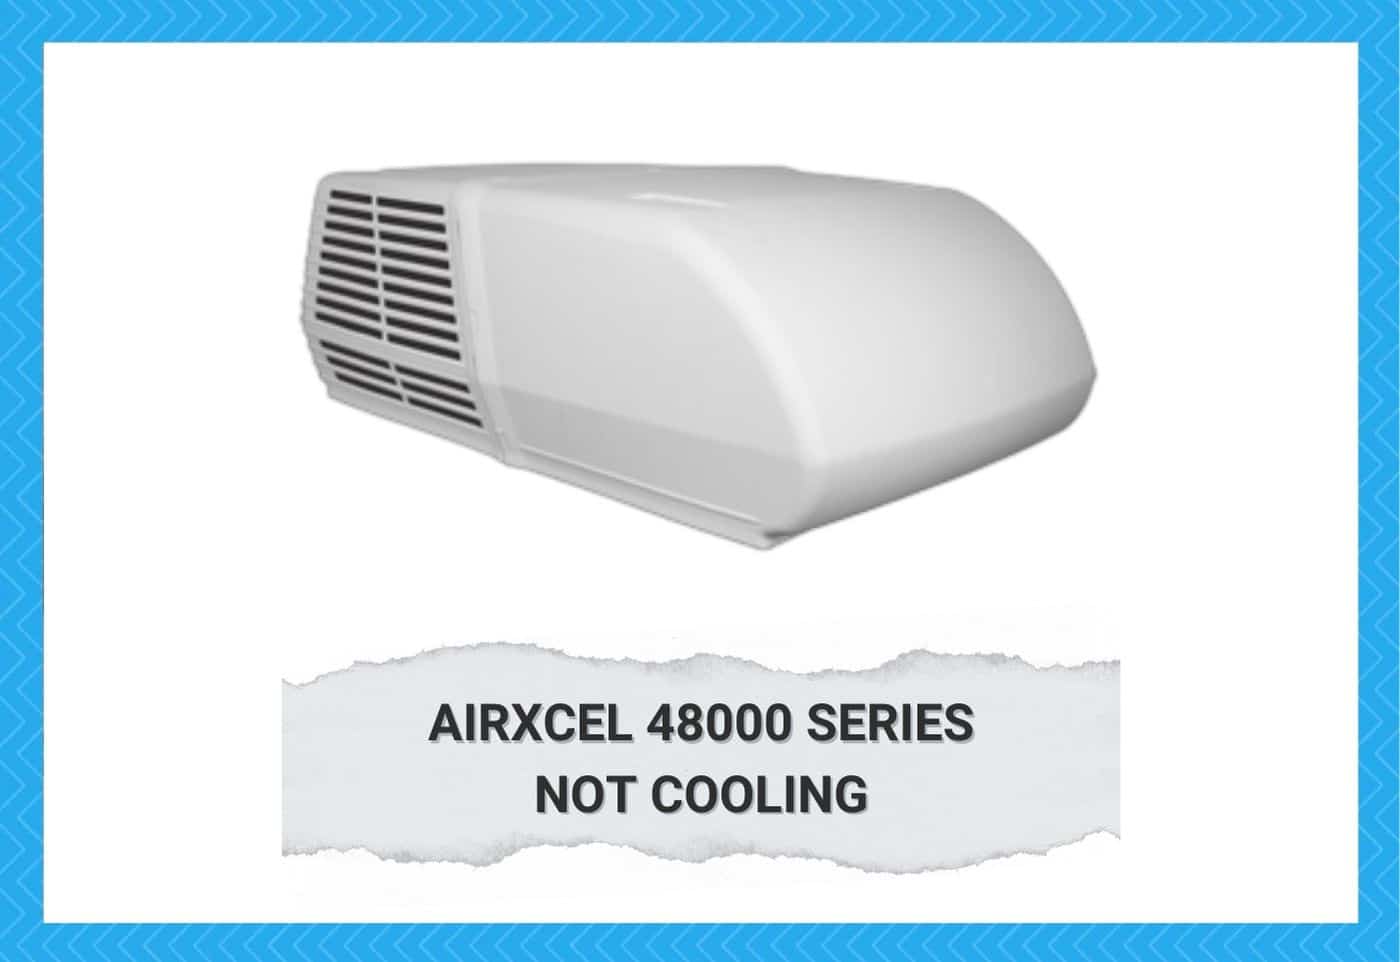 Airxcel 48000 Series Not Cooling